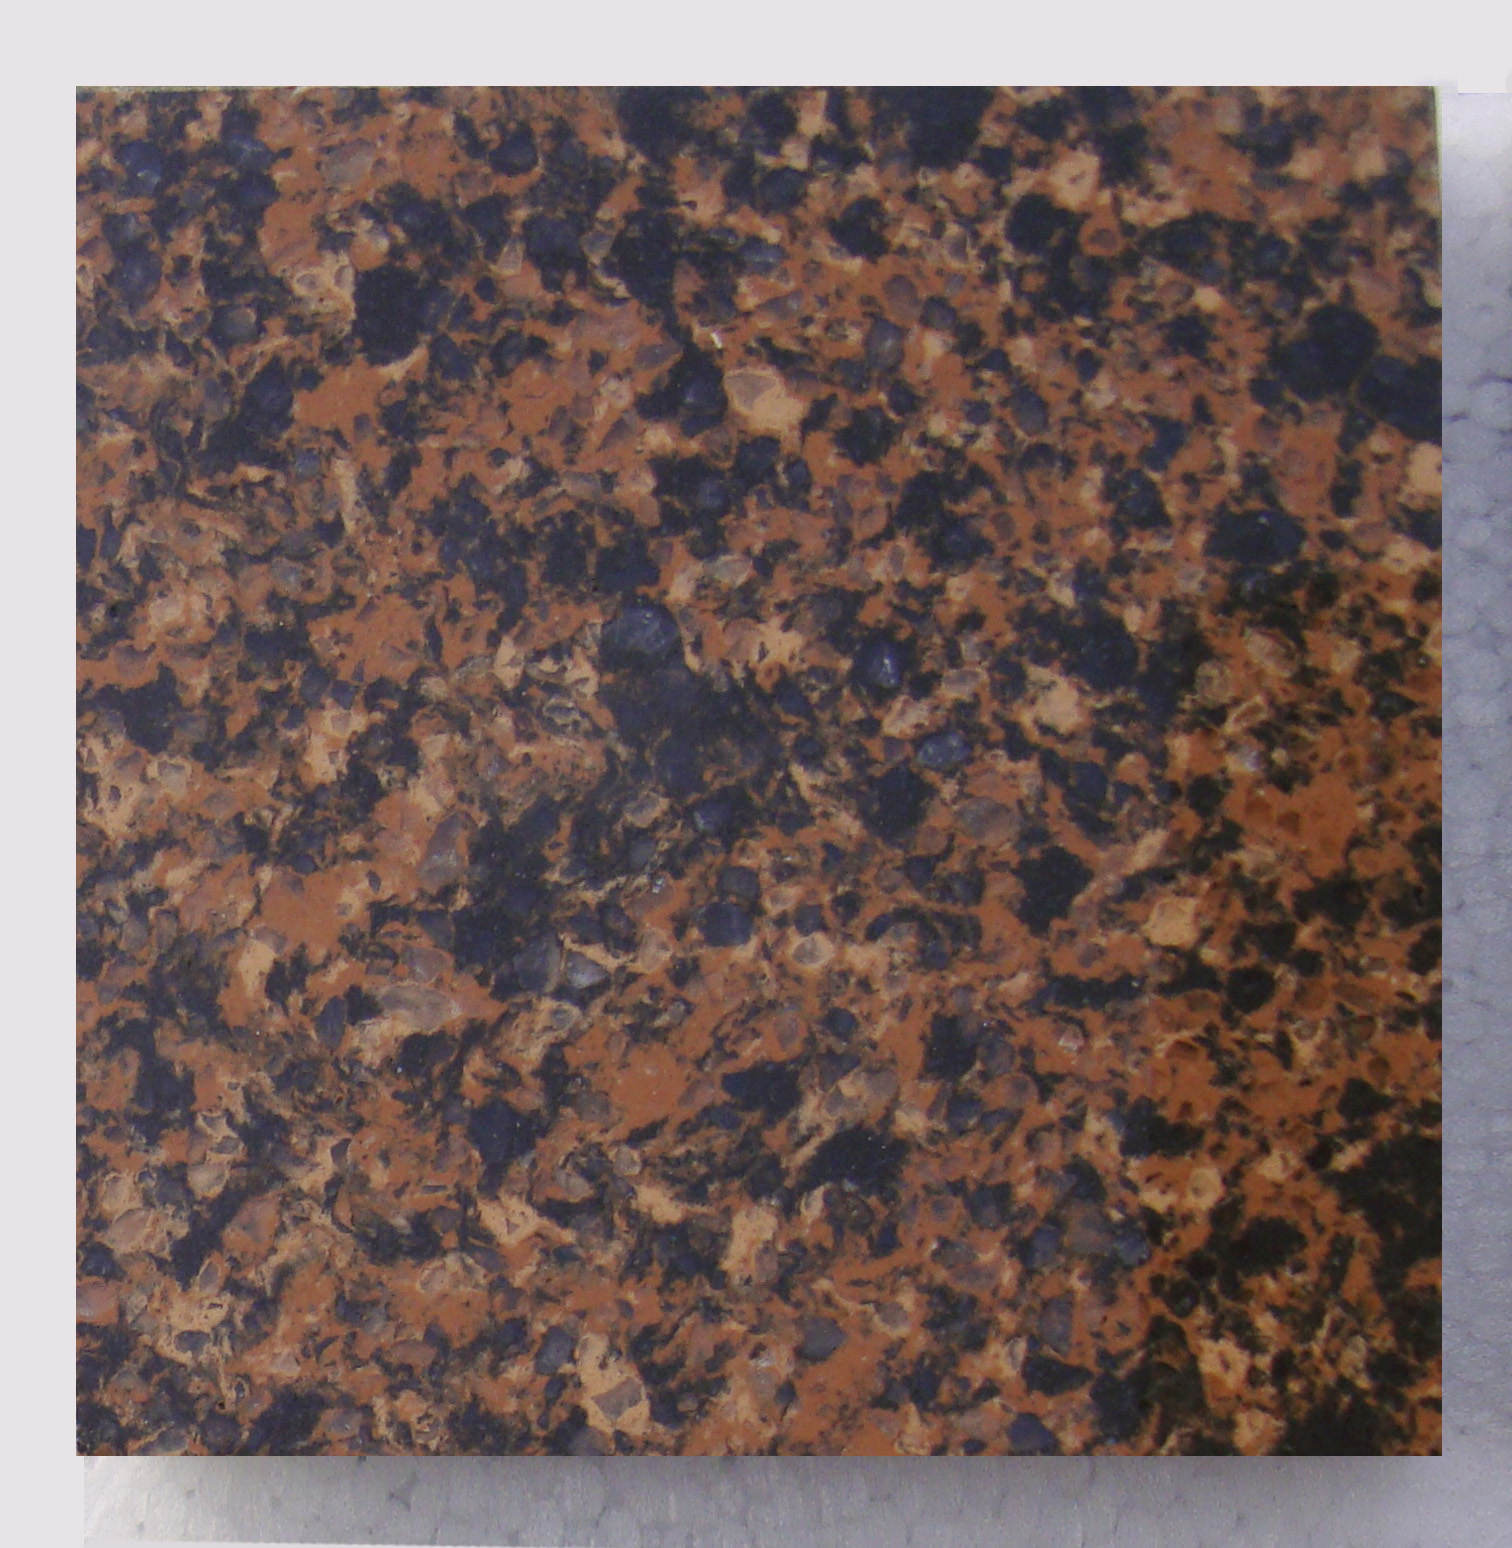 Artificial Quartz Manmade Stone Tile for Floor and Wall Tile, Kitchen Top, Bathroom Sink Top